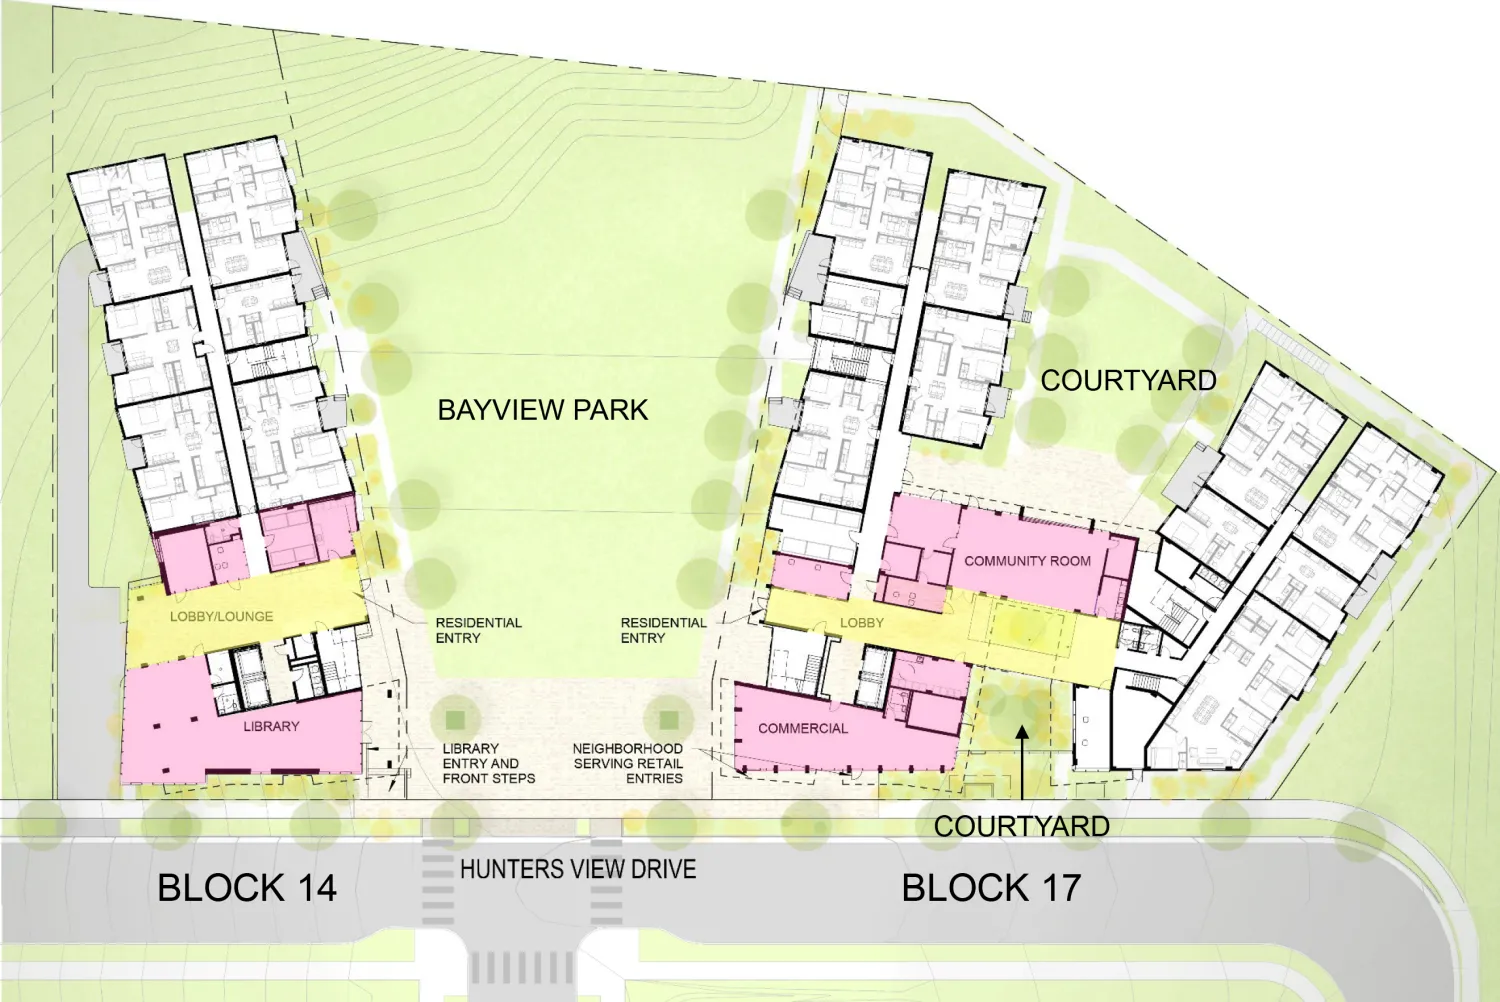 Site plan for Hunter’s View Phase 3 in San Francisco, Ca.